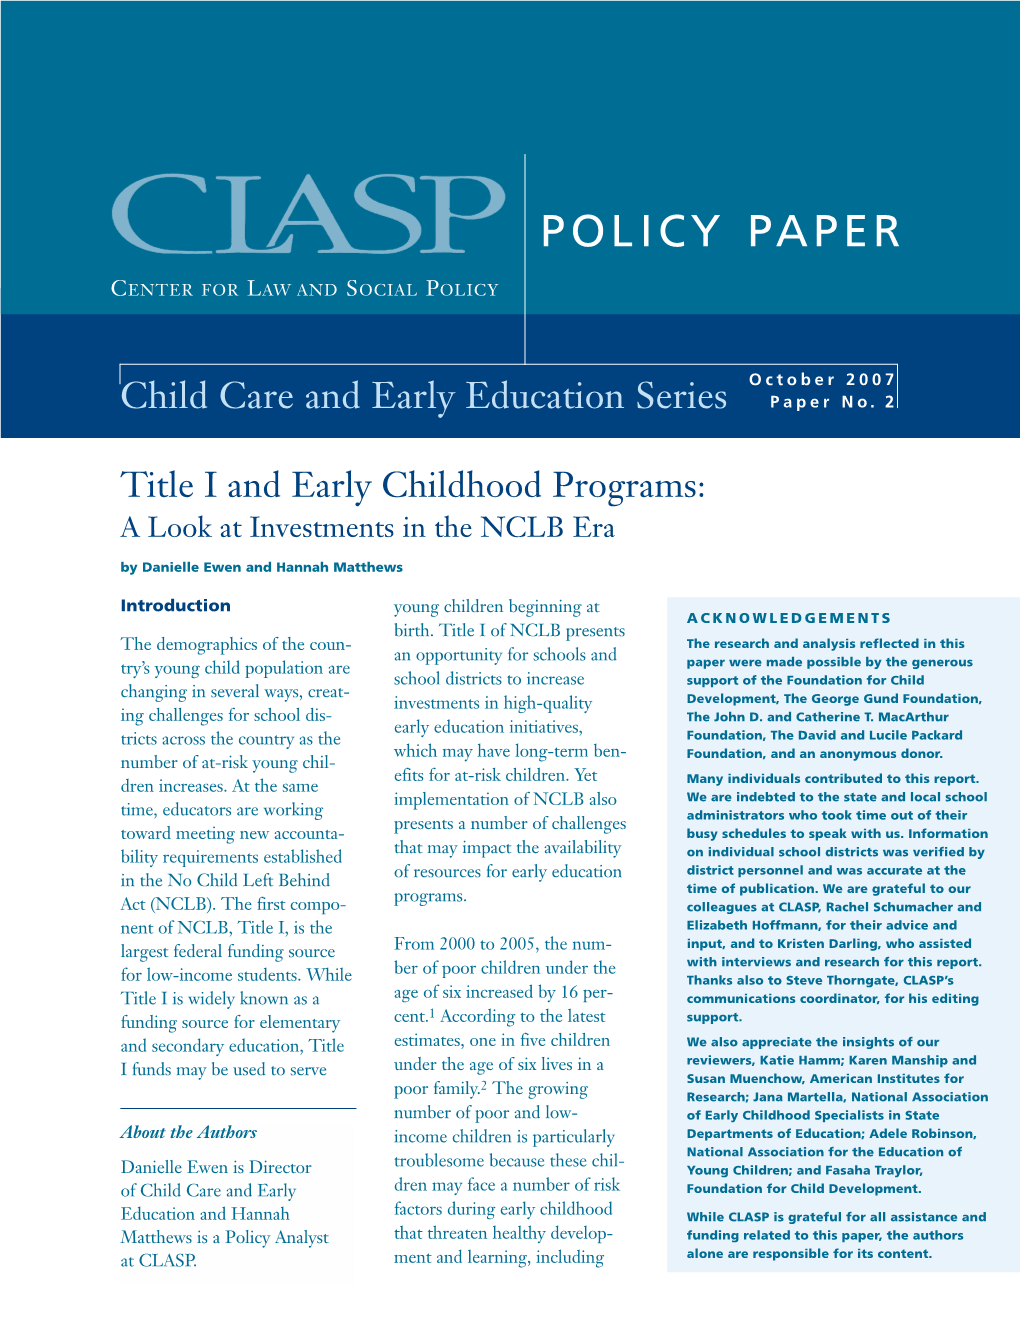 Title I and Early Childhood Programs: a Look at Investments in the NCLB Era